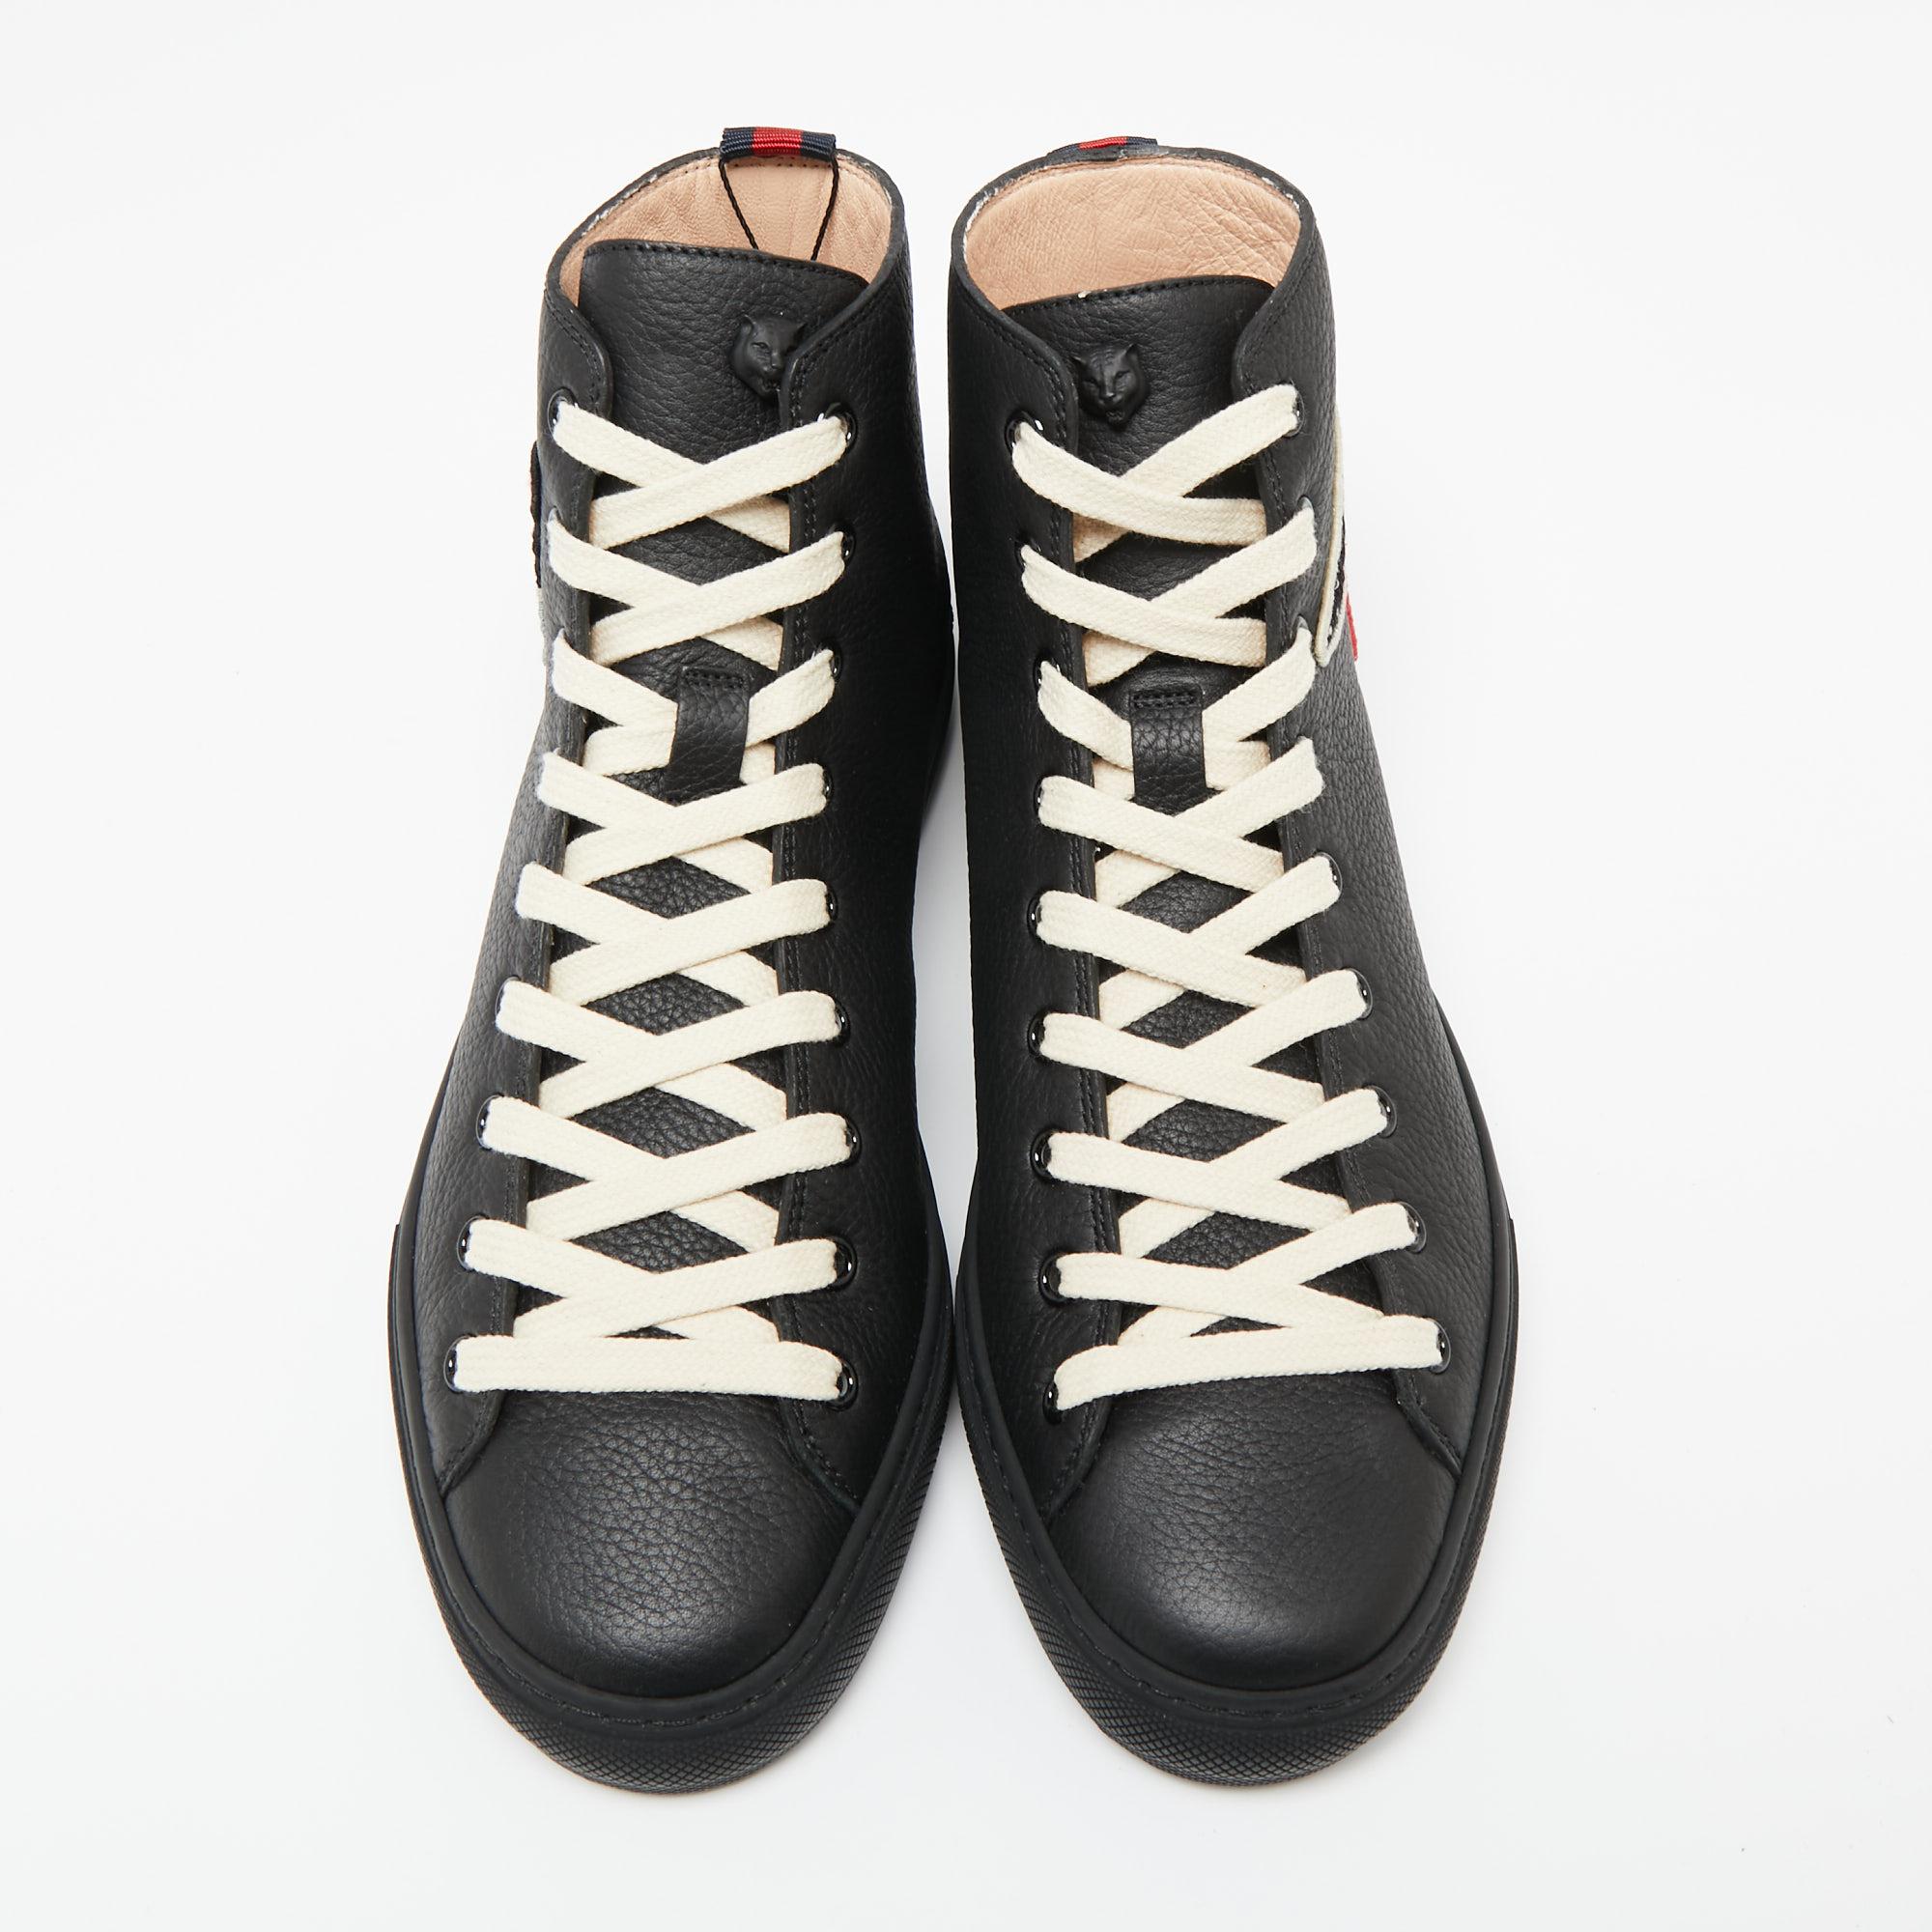 This pair of black Gucci sneakers are crafted from leather featuring different patches on the sides and signature Web details on the counters. They come with lace-up vamps and leather-lined insoles for added comfort. Team them with jeans and a